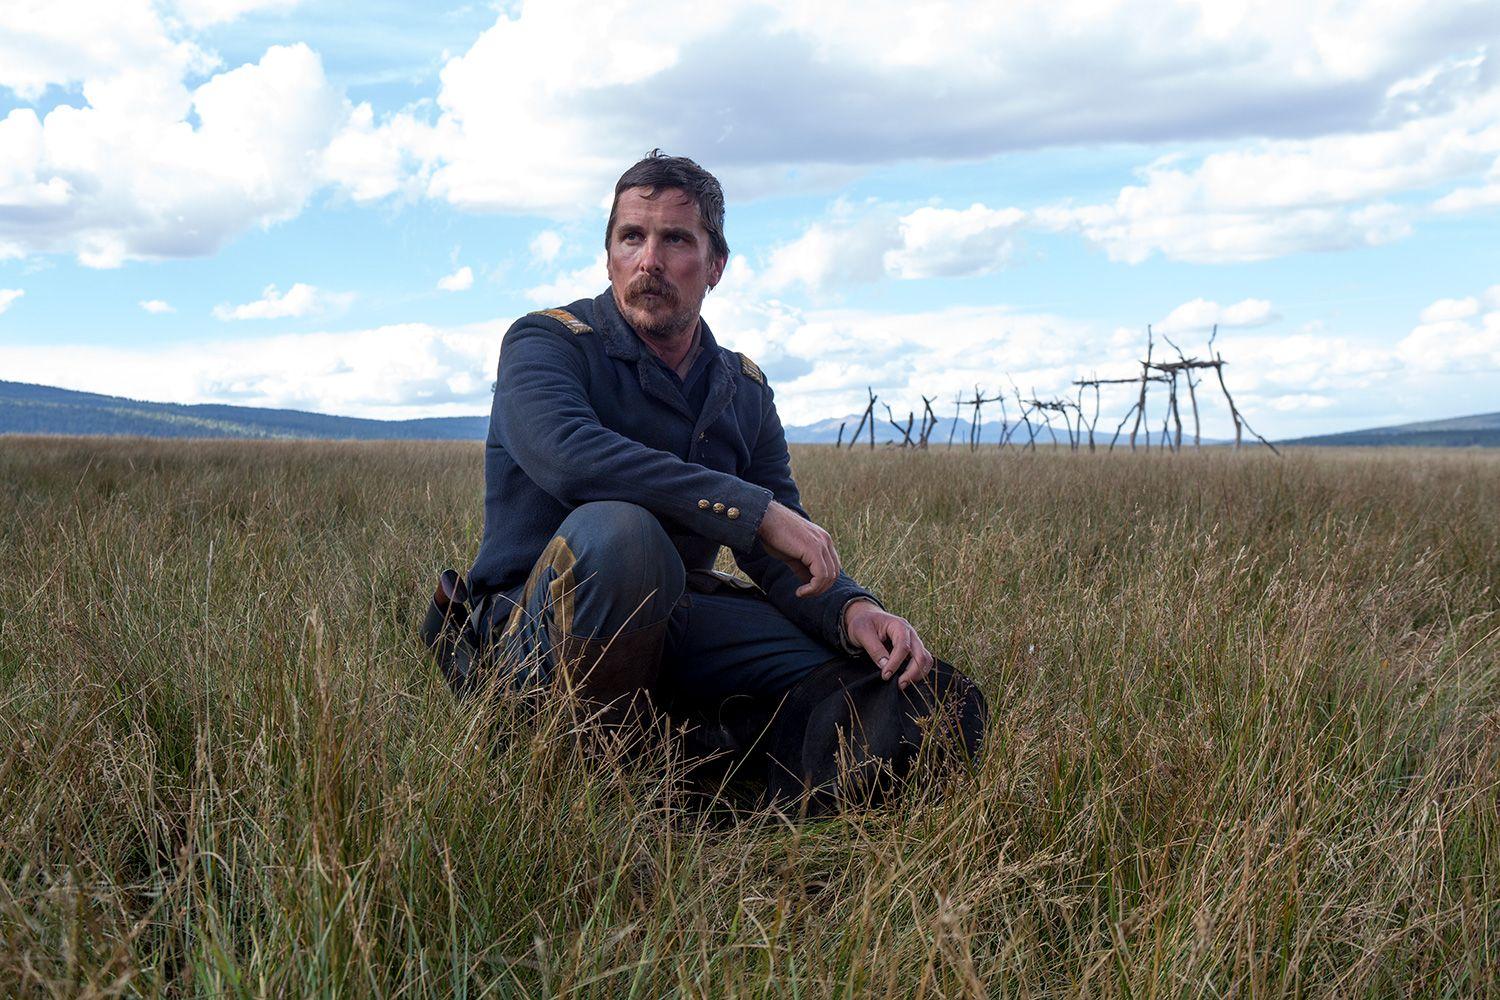 Hostiles 377917 Gallery, Image, Posters, Wallpaper and Stills